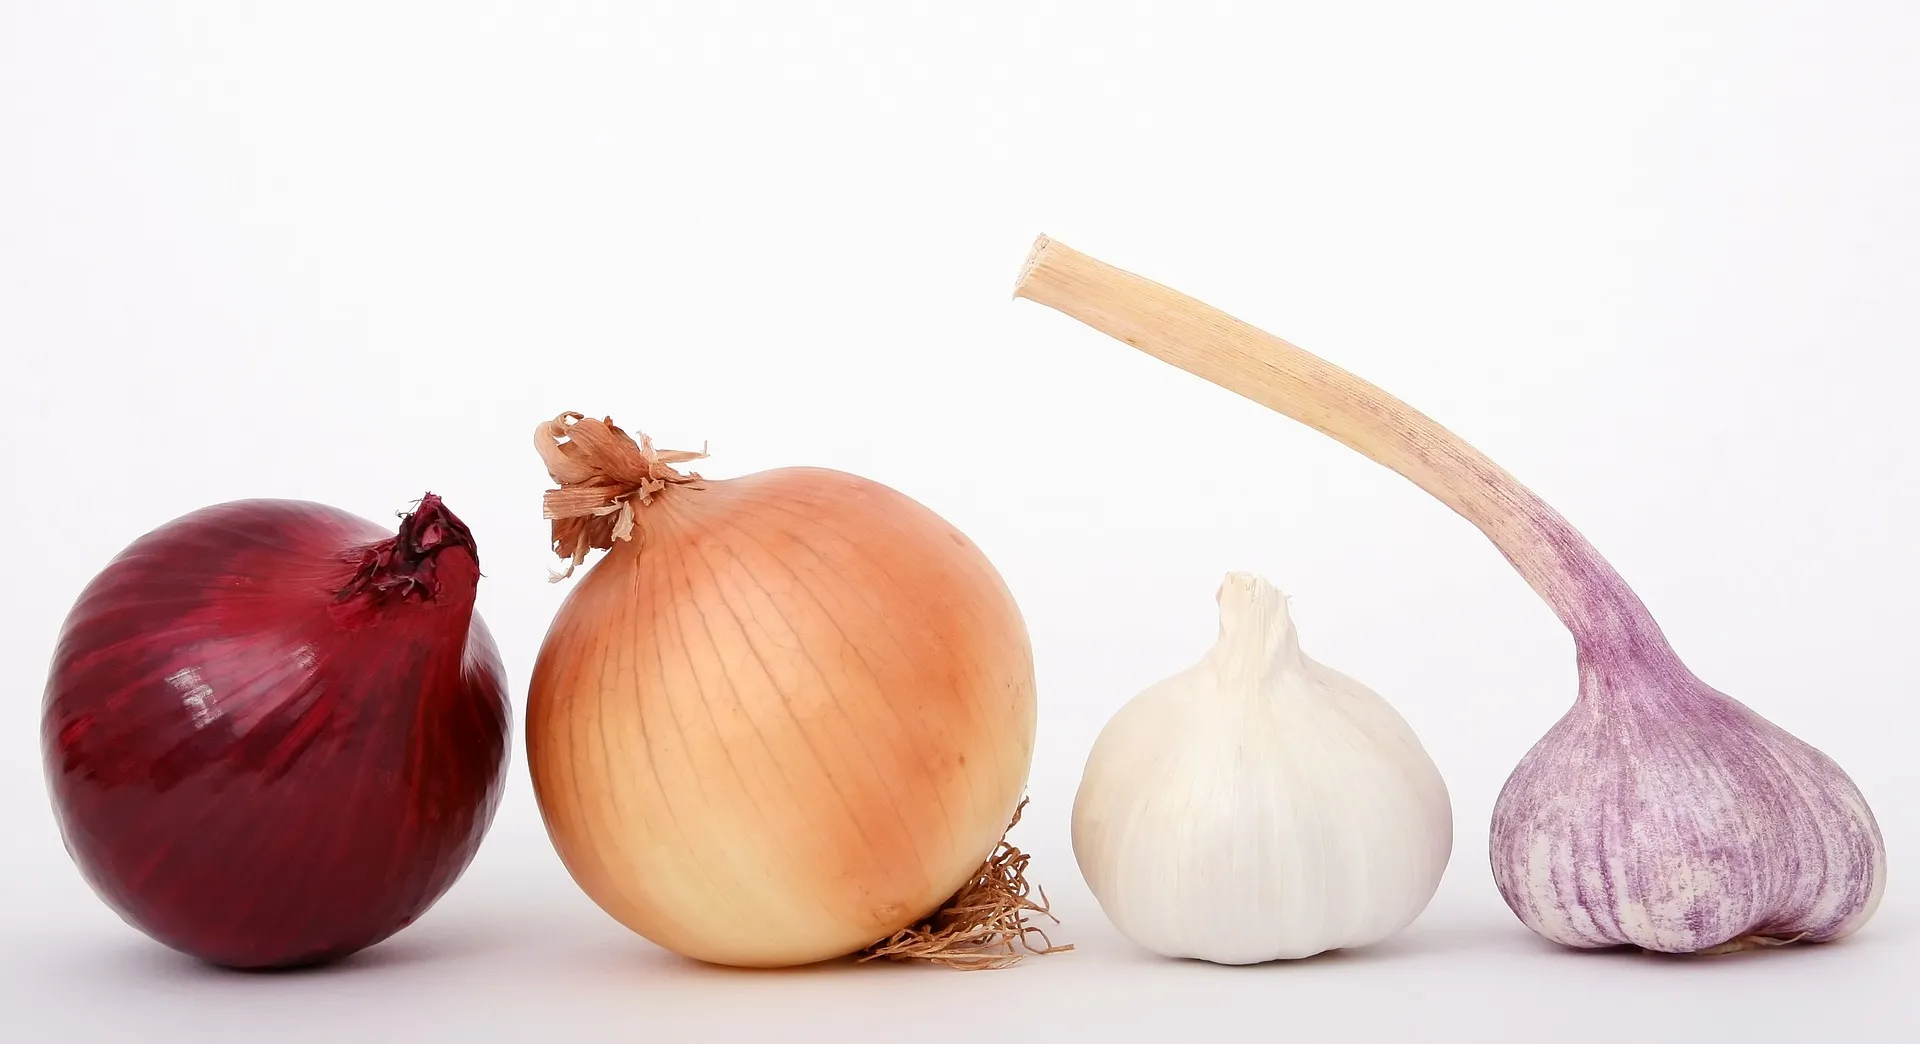 Onions and garlic are excellent sources of sulfur. (Required for proper immune system functioning)